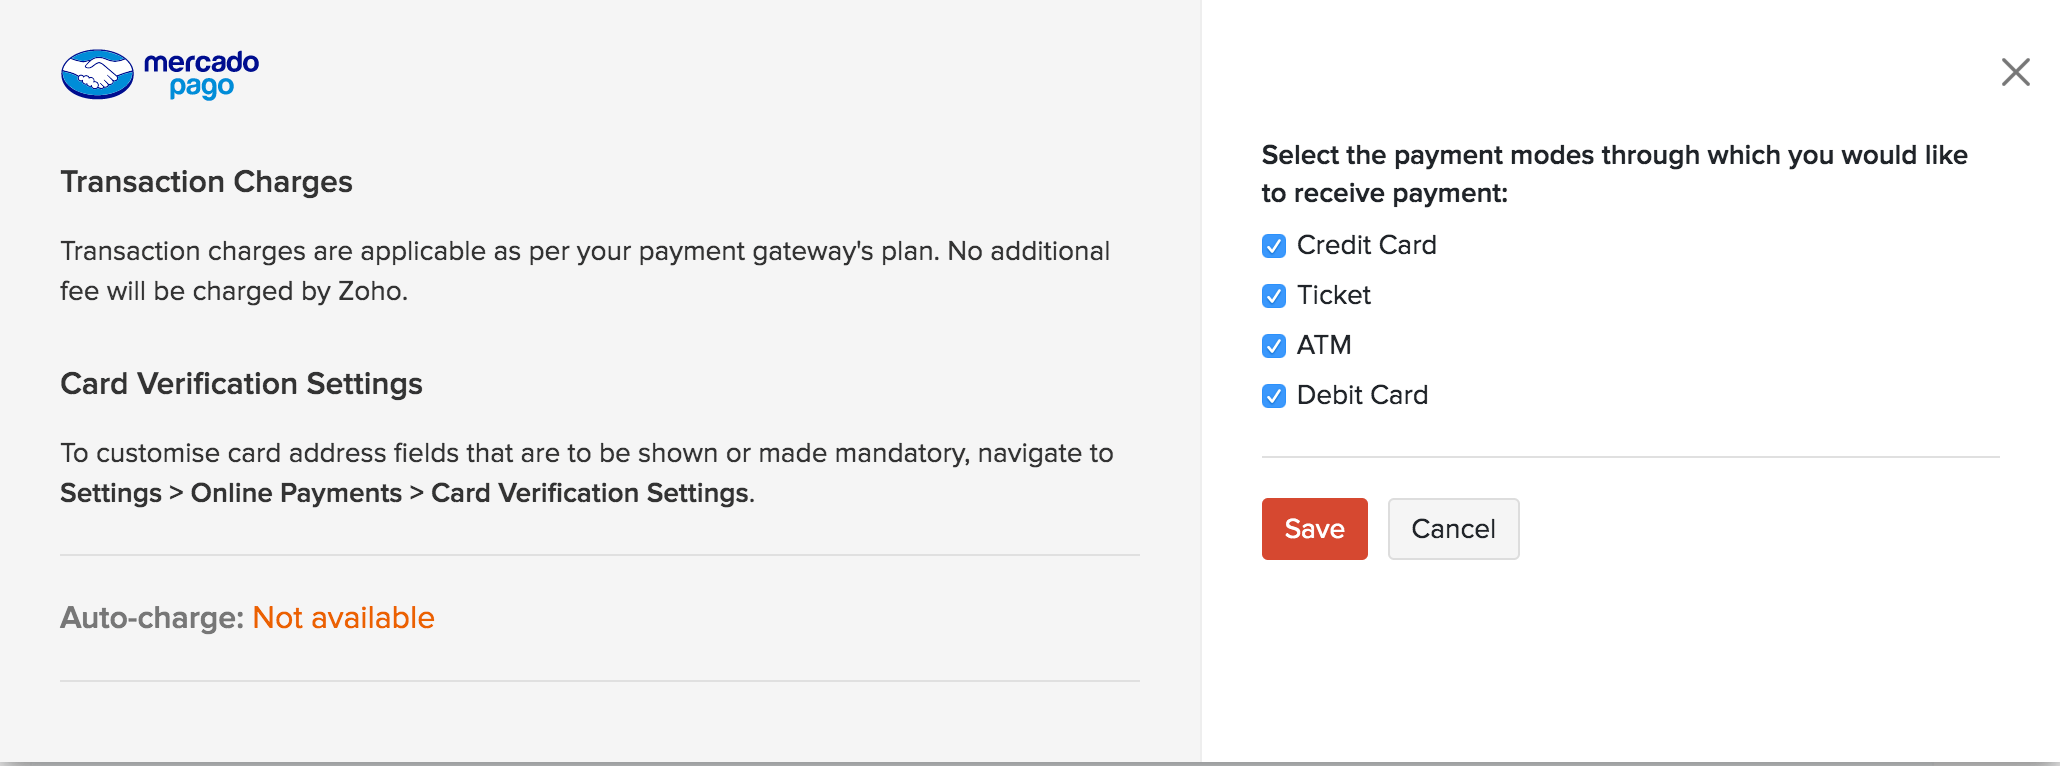 Select Payment Modes